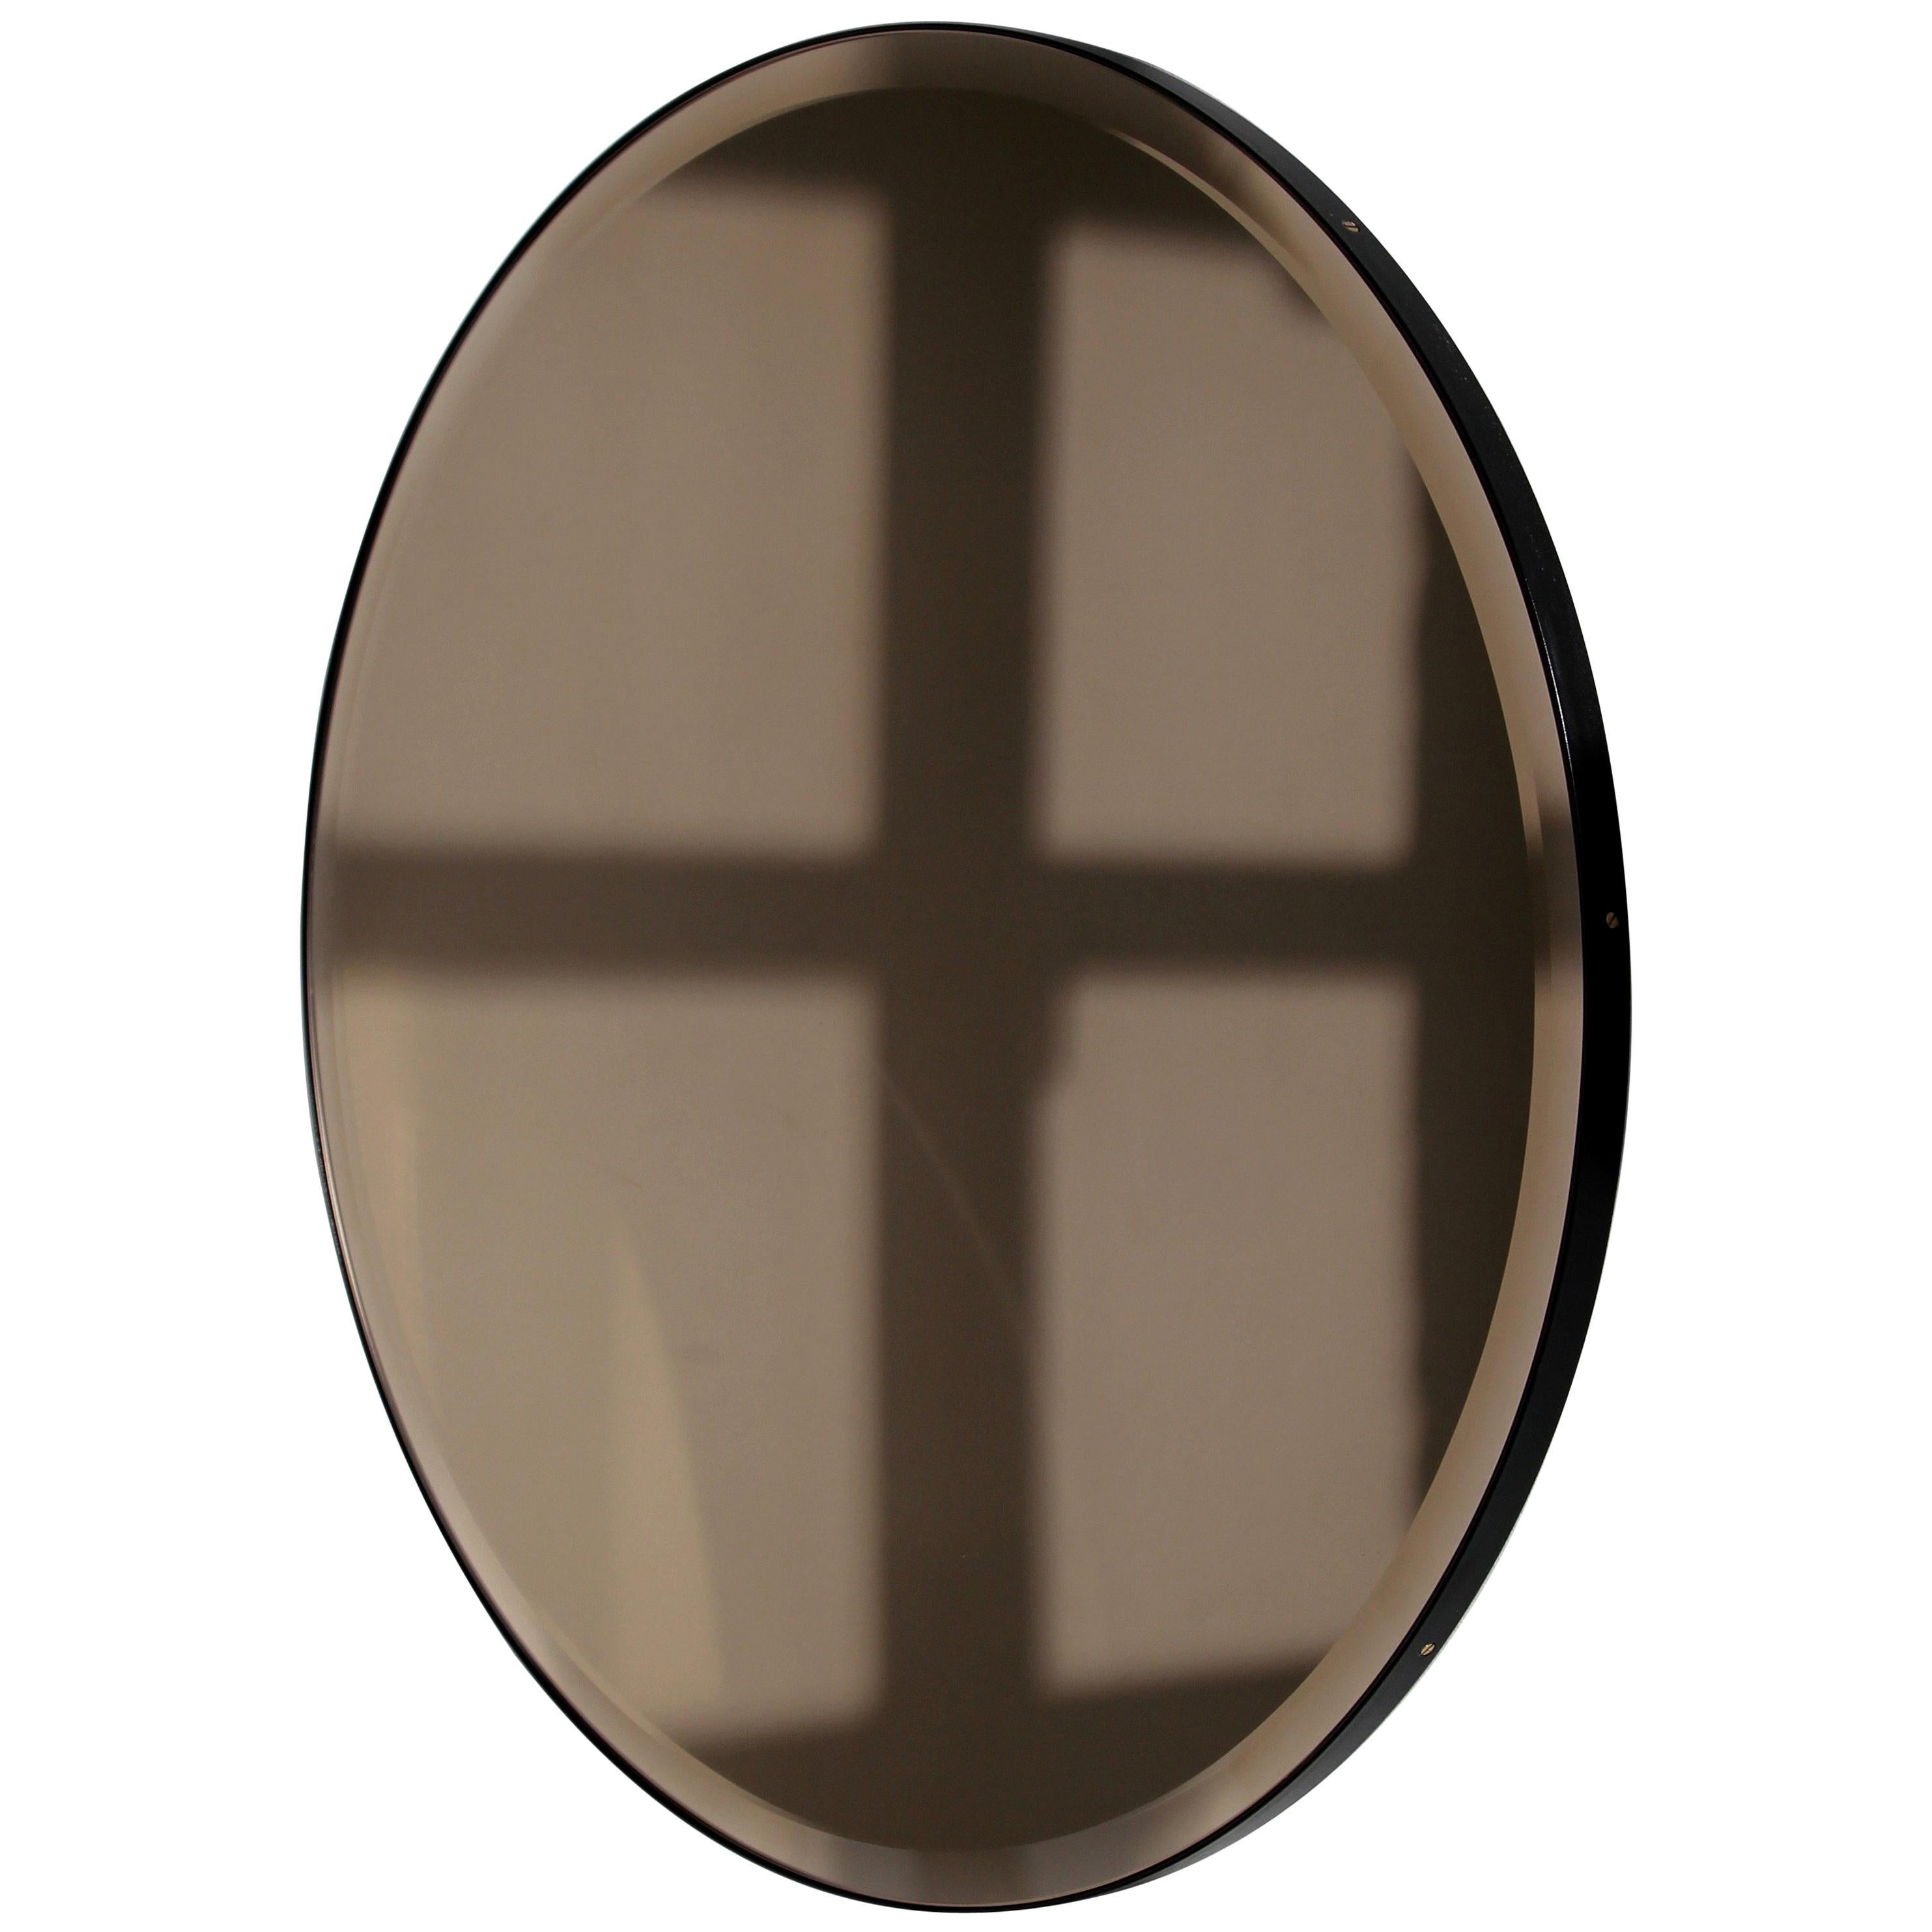 Orbis Bronze Tinted Round Beveled Art Deco Mirror with a Black Frame, Small